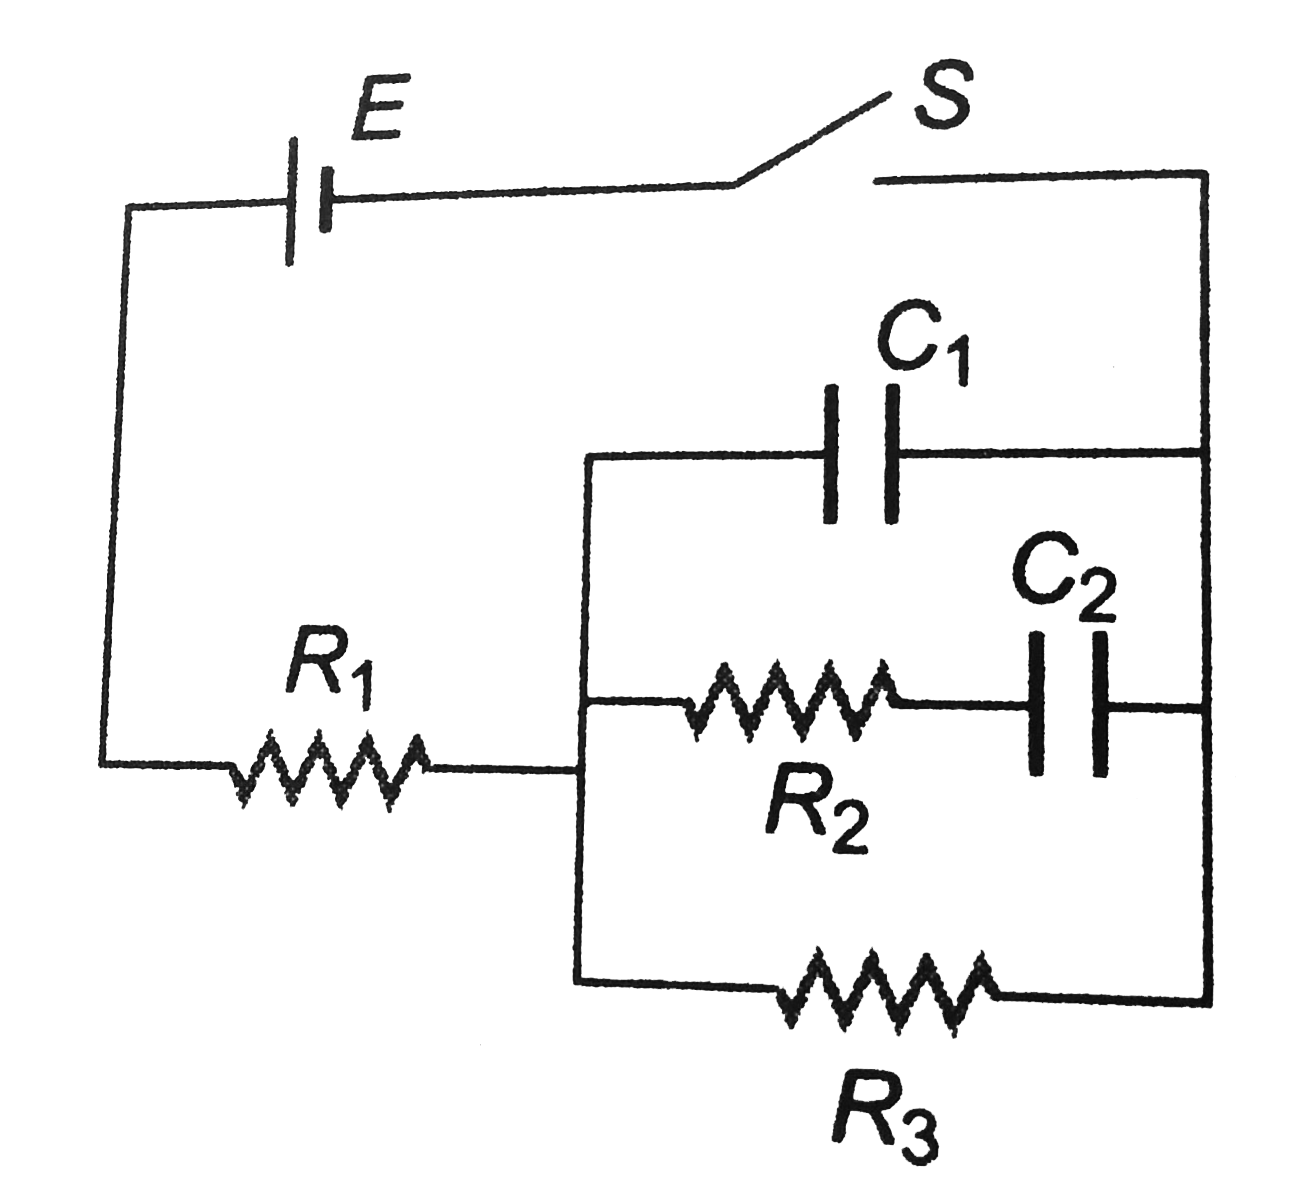 In the circuit diagram the current through the battery immediately after the switch S is closed is